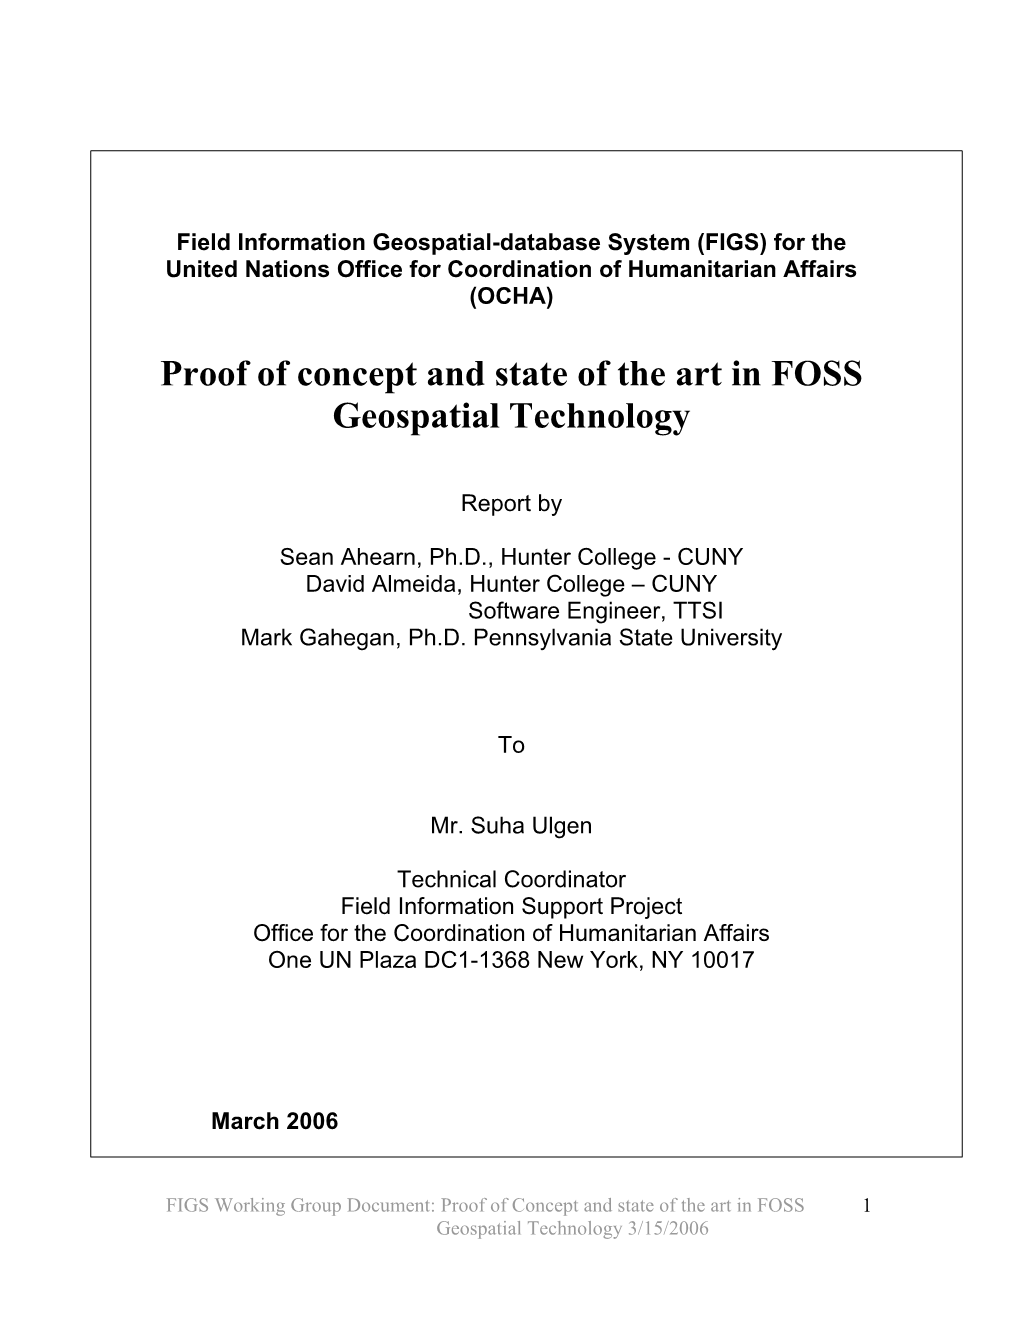 Proof of Concept and State of the Art in FOSS Geospatial Technology